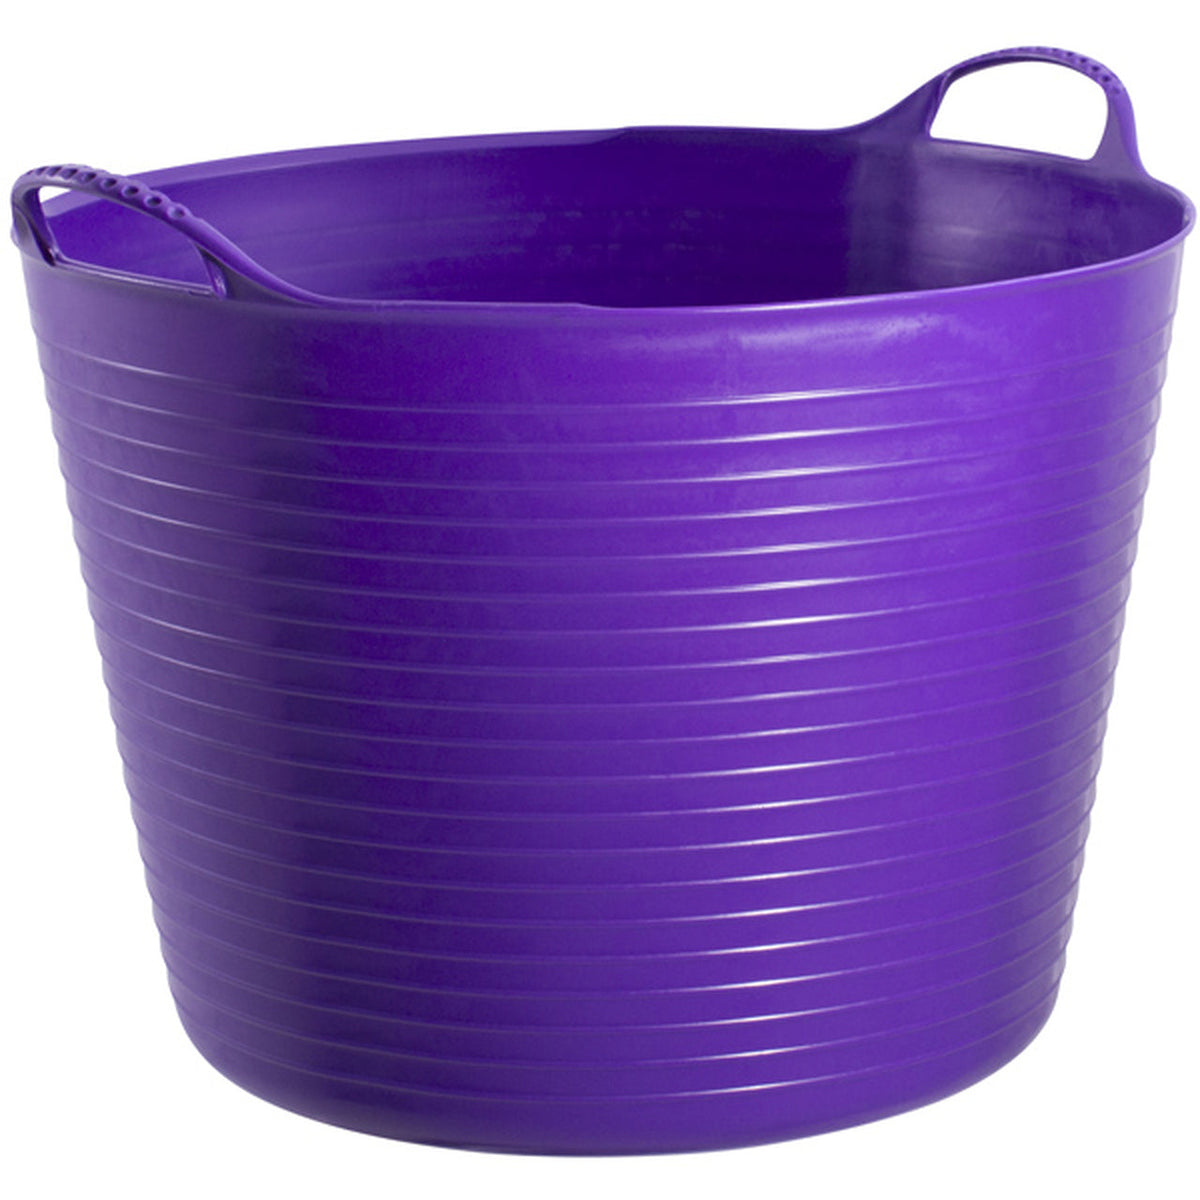 Large purple bucket with measurements on inside and two curved handles.